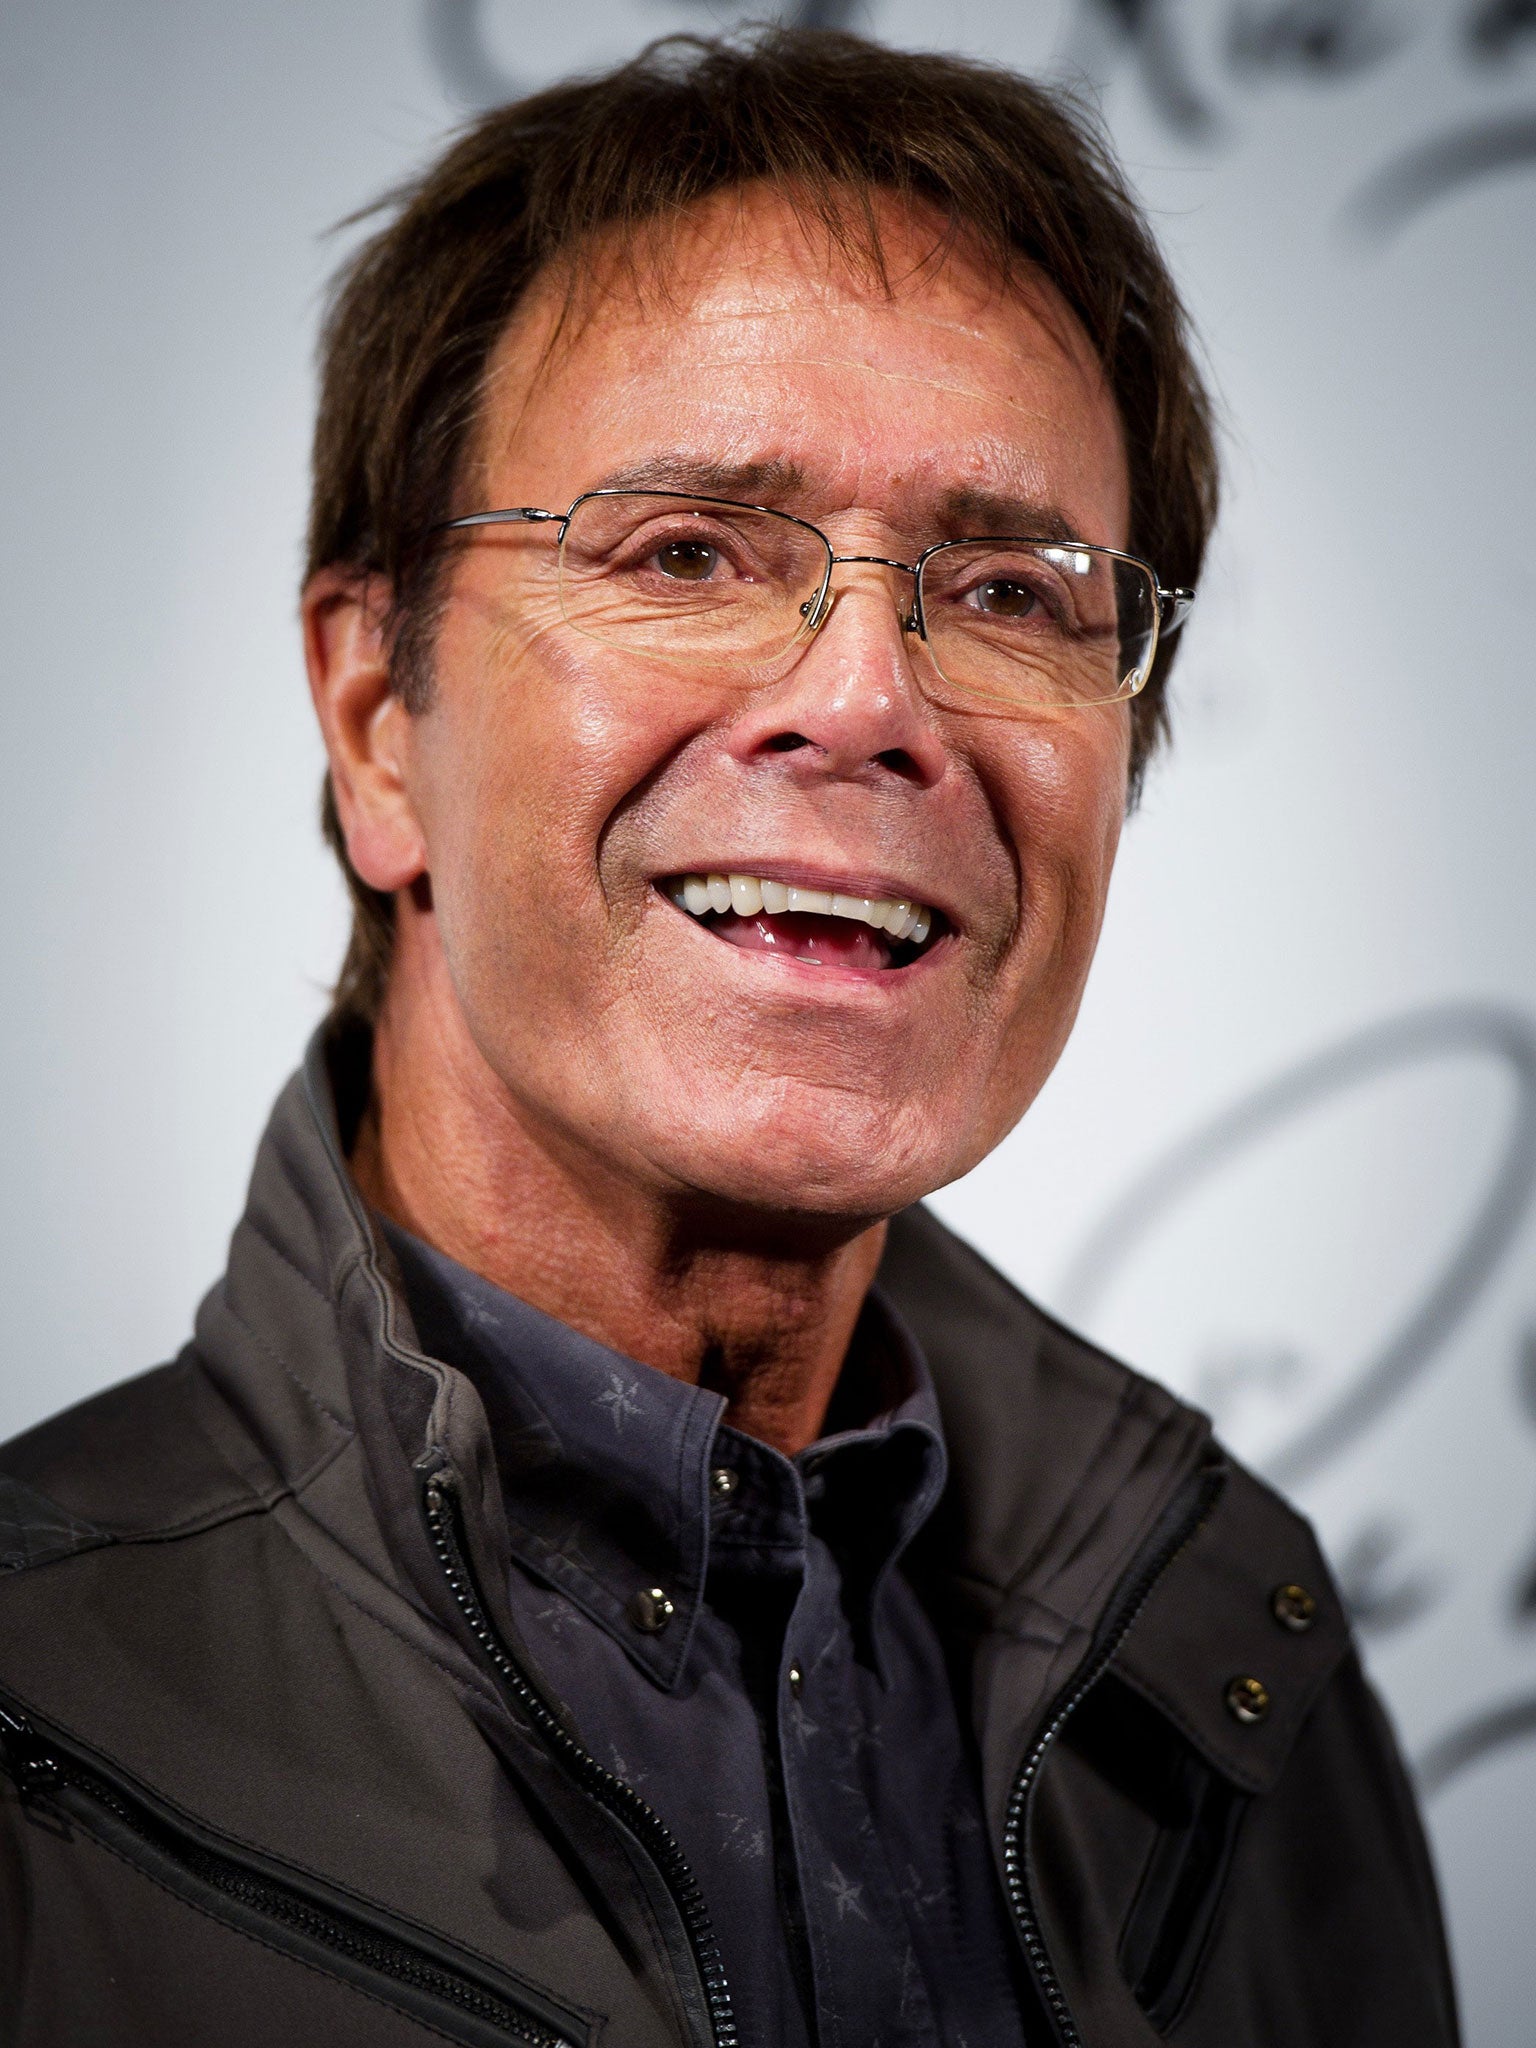 In a statement, Sir Cliff Richard said he had previously chosen not to acknowledge the allegation